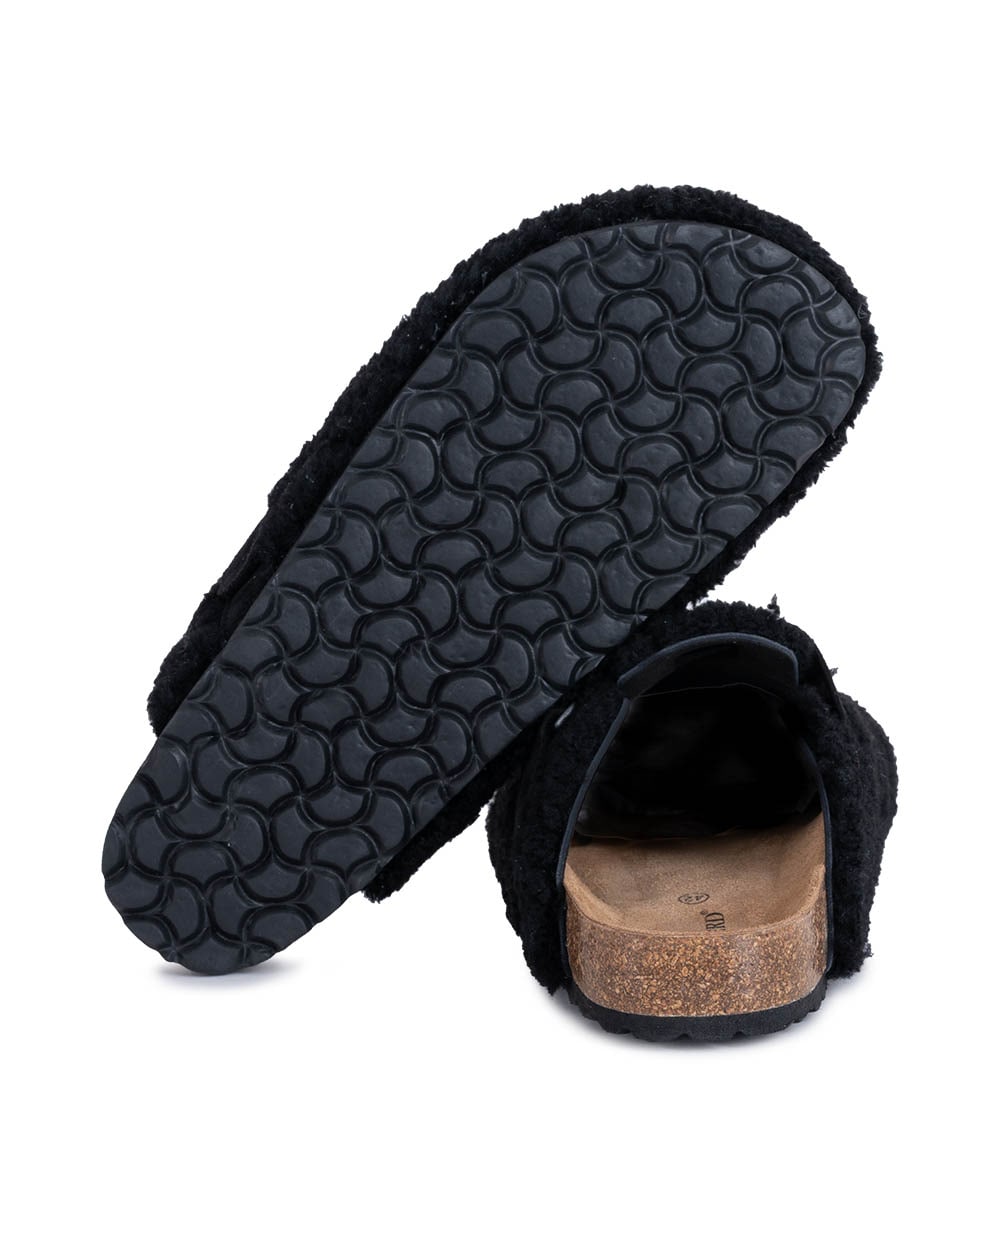 Roma slippers